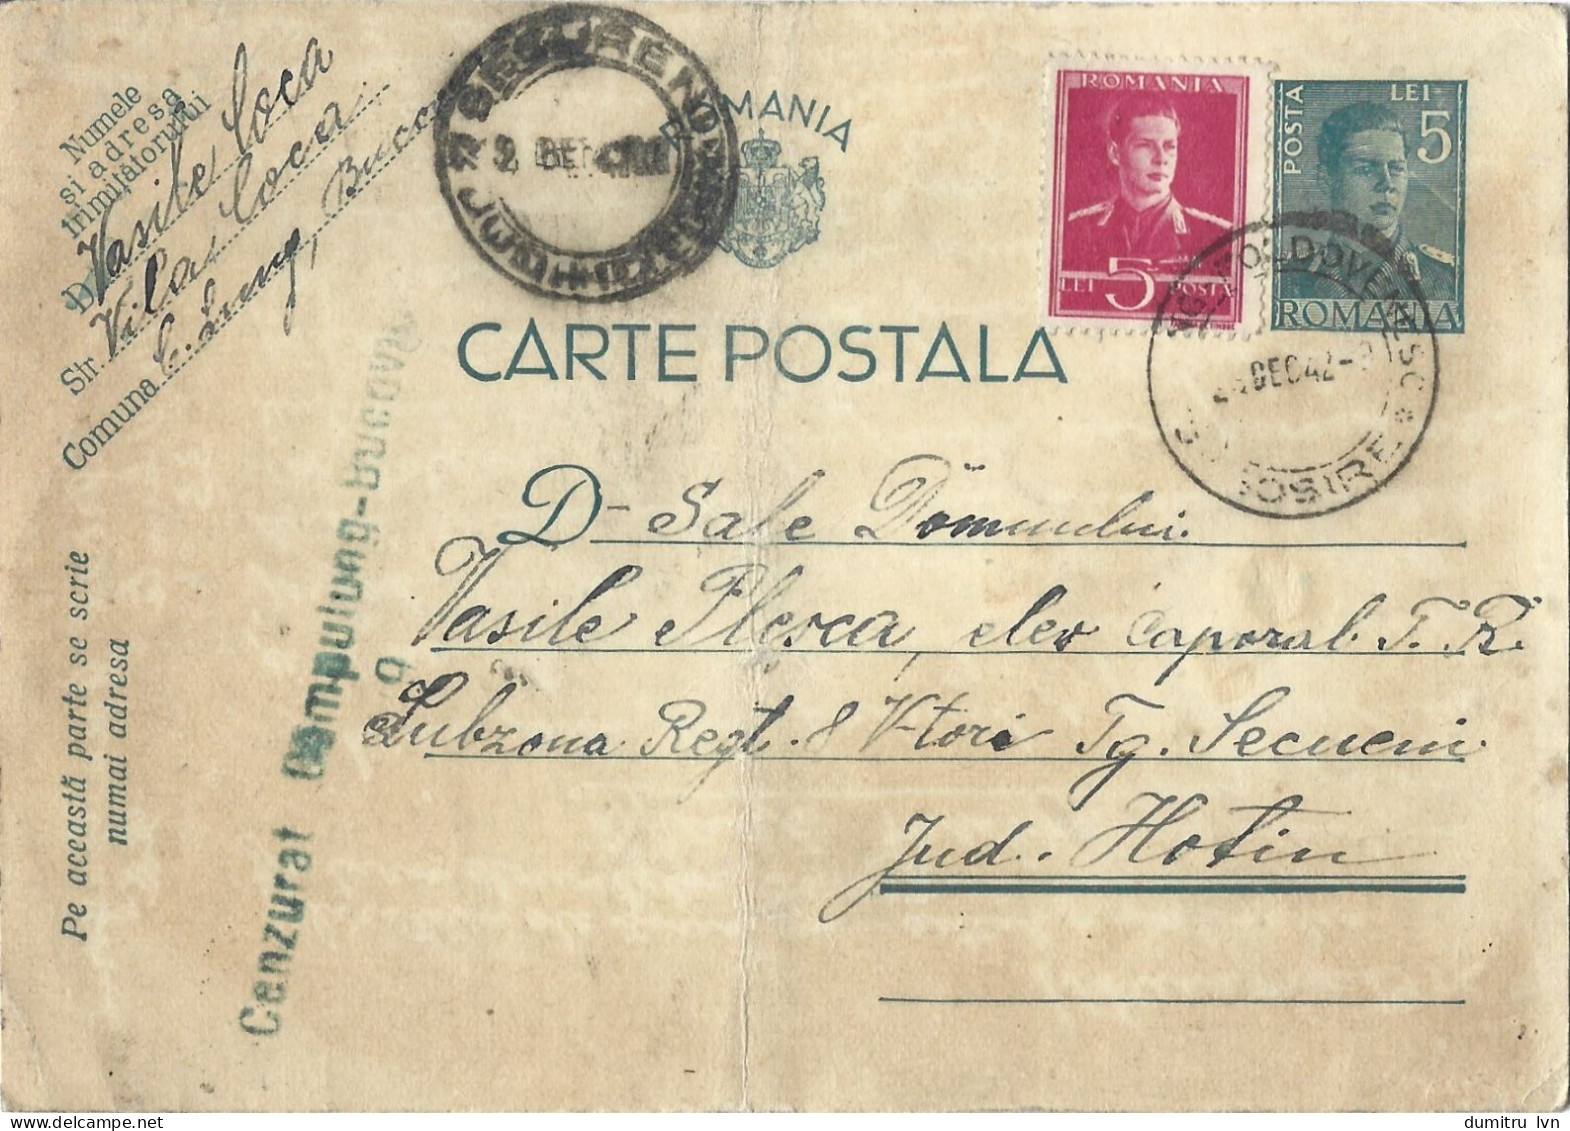 ROMANIA 1942 MILITARY POSTCARD, CENSORED CAMPULUNG-BUCOVINA, POSTCARD STATIONERY - 2. Weltkrieg (Briefe)